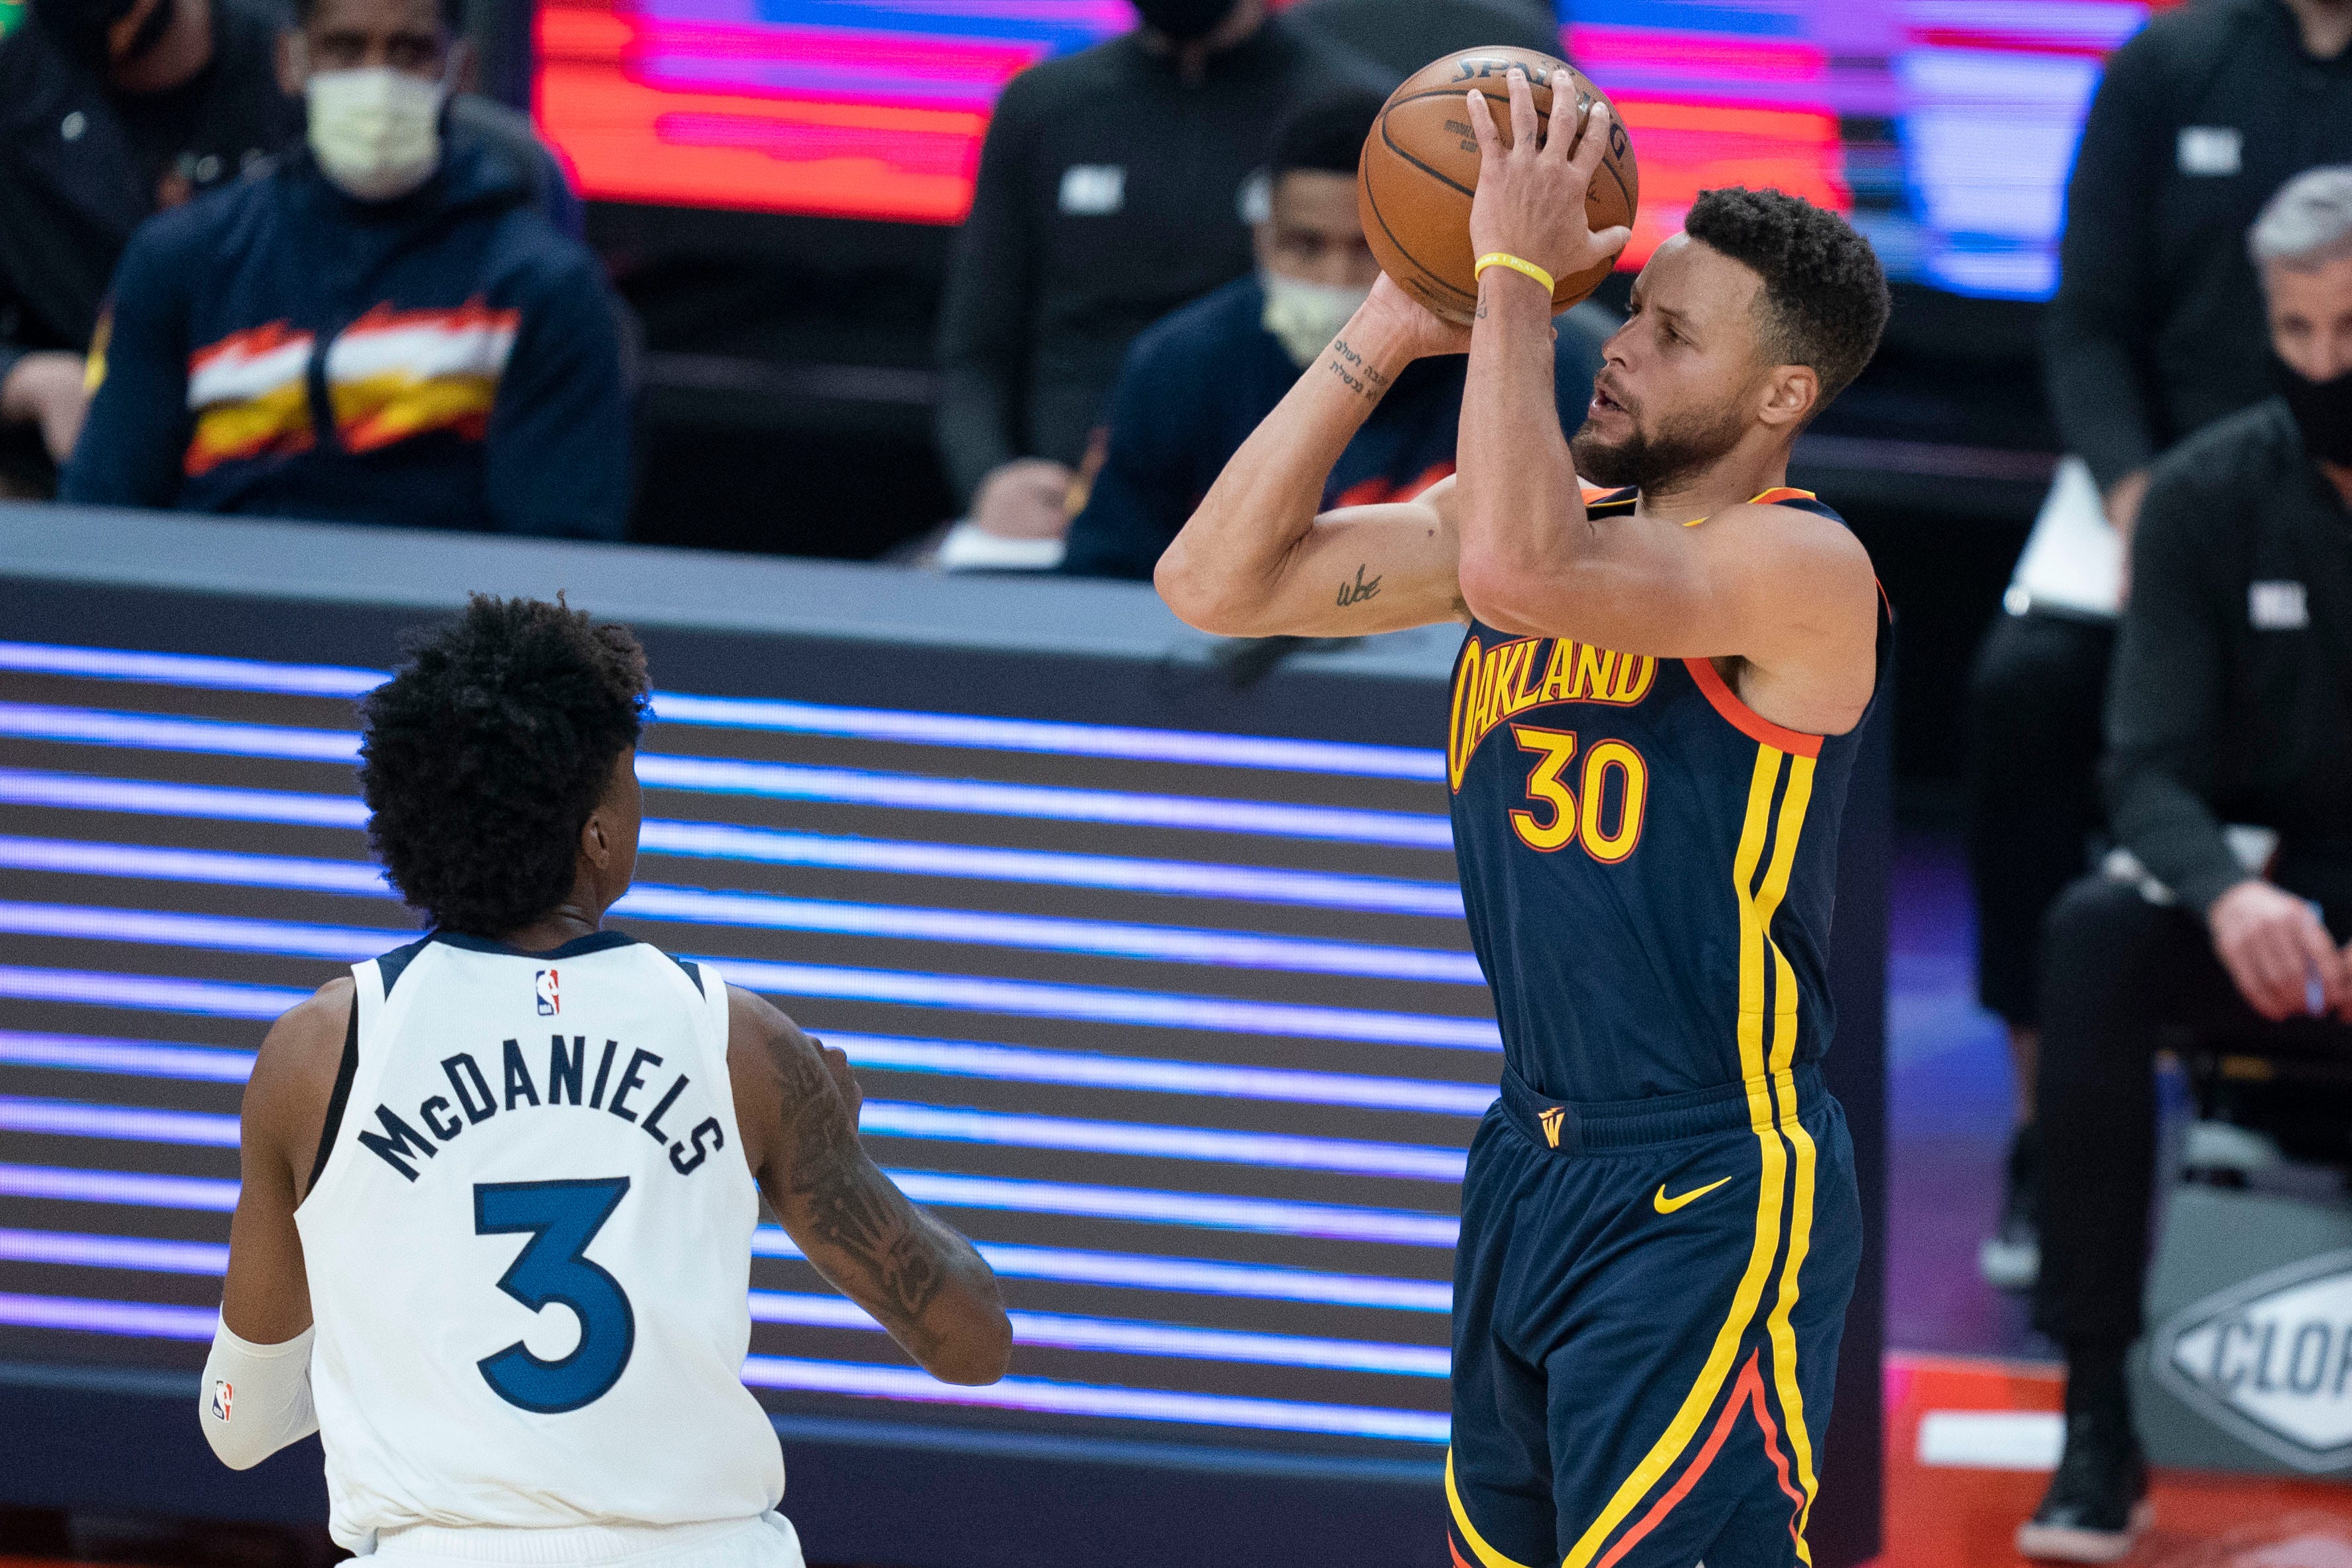 Curry scores 36 points in Timberwolves 130108 loss to Golden State